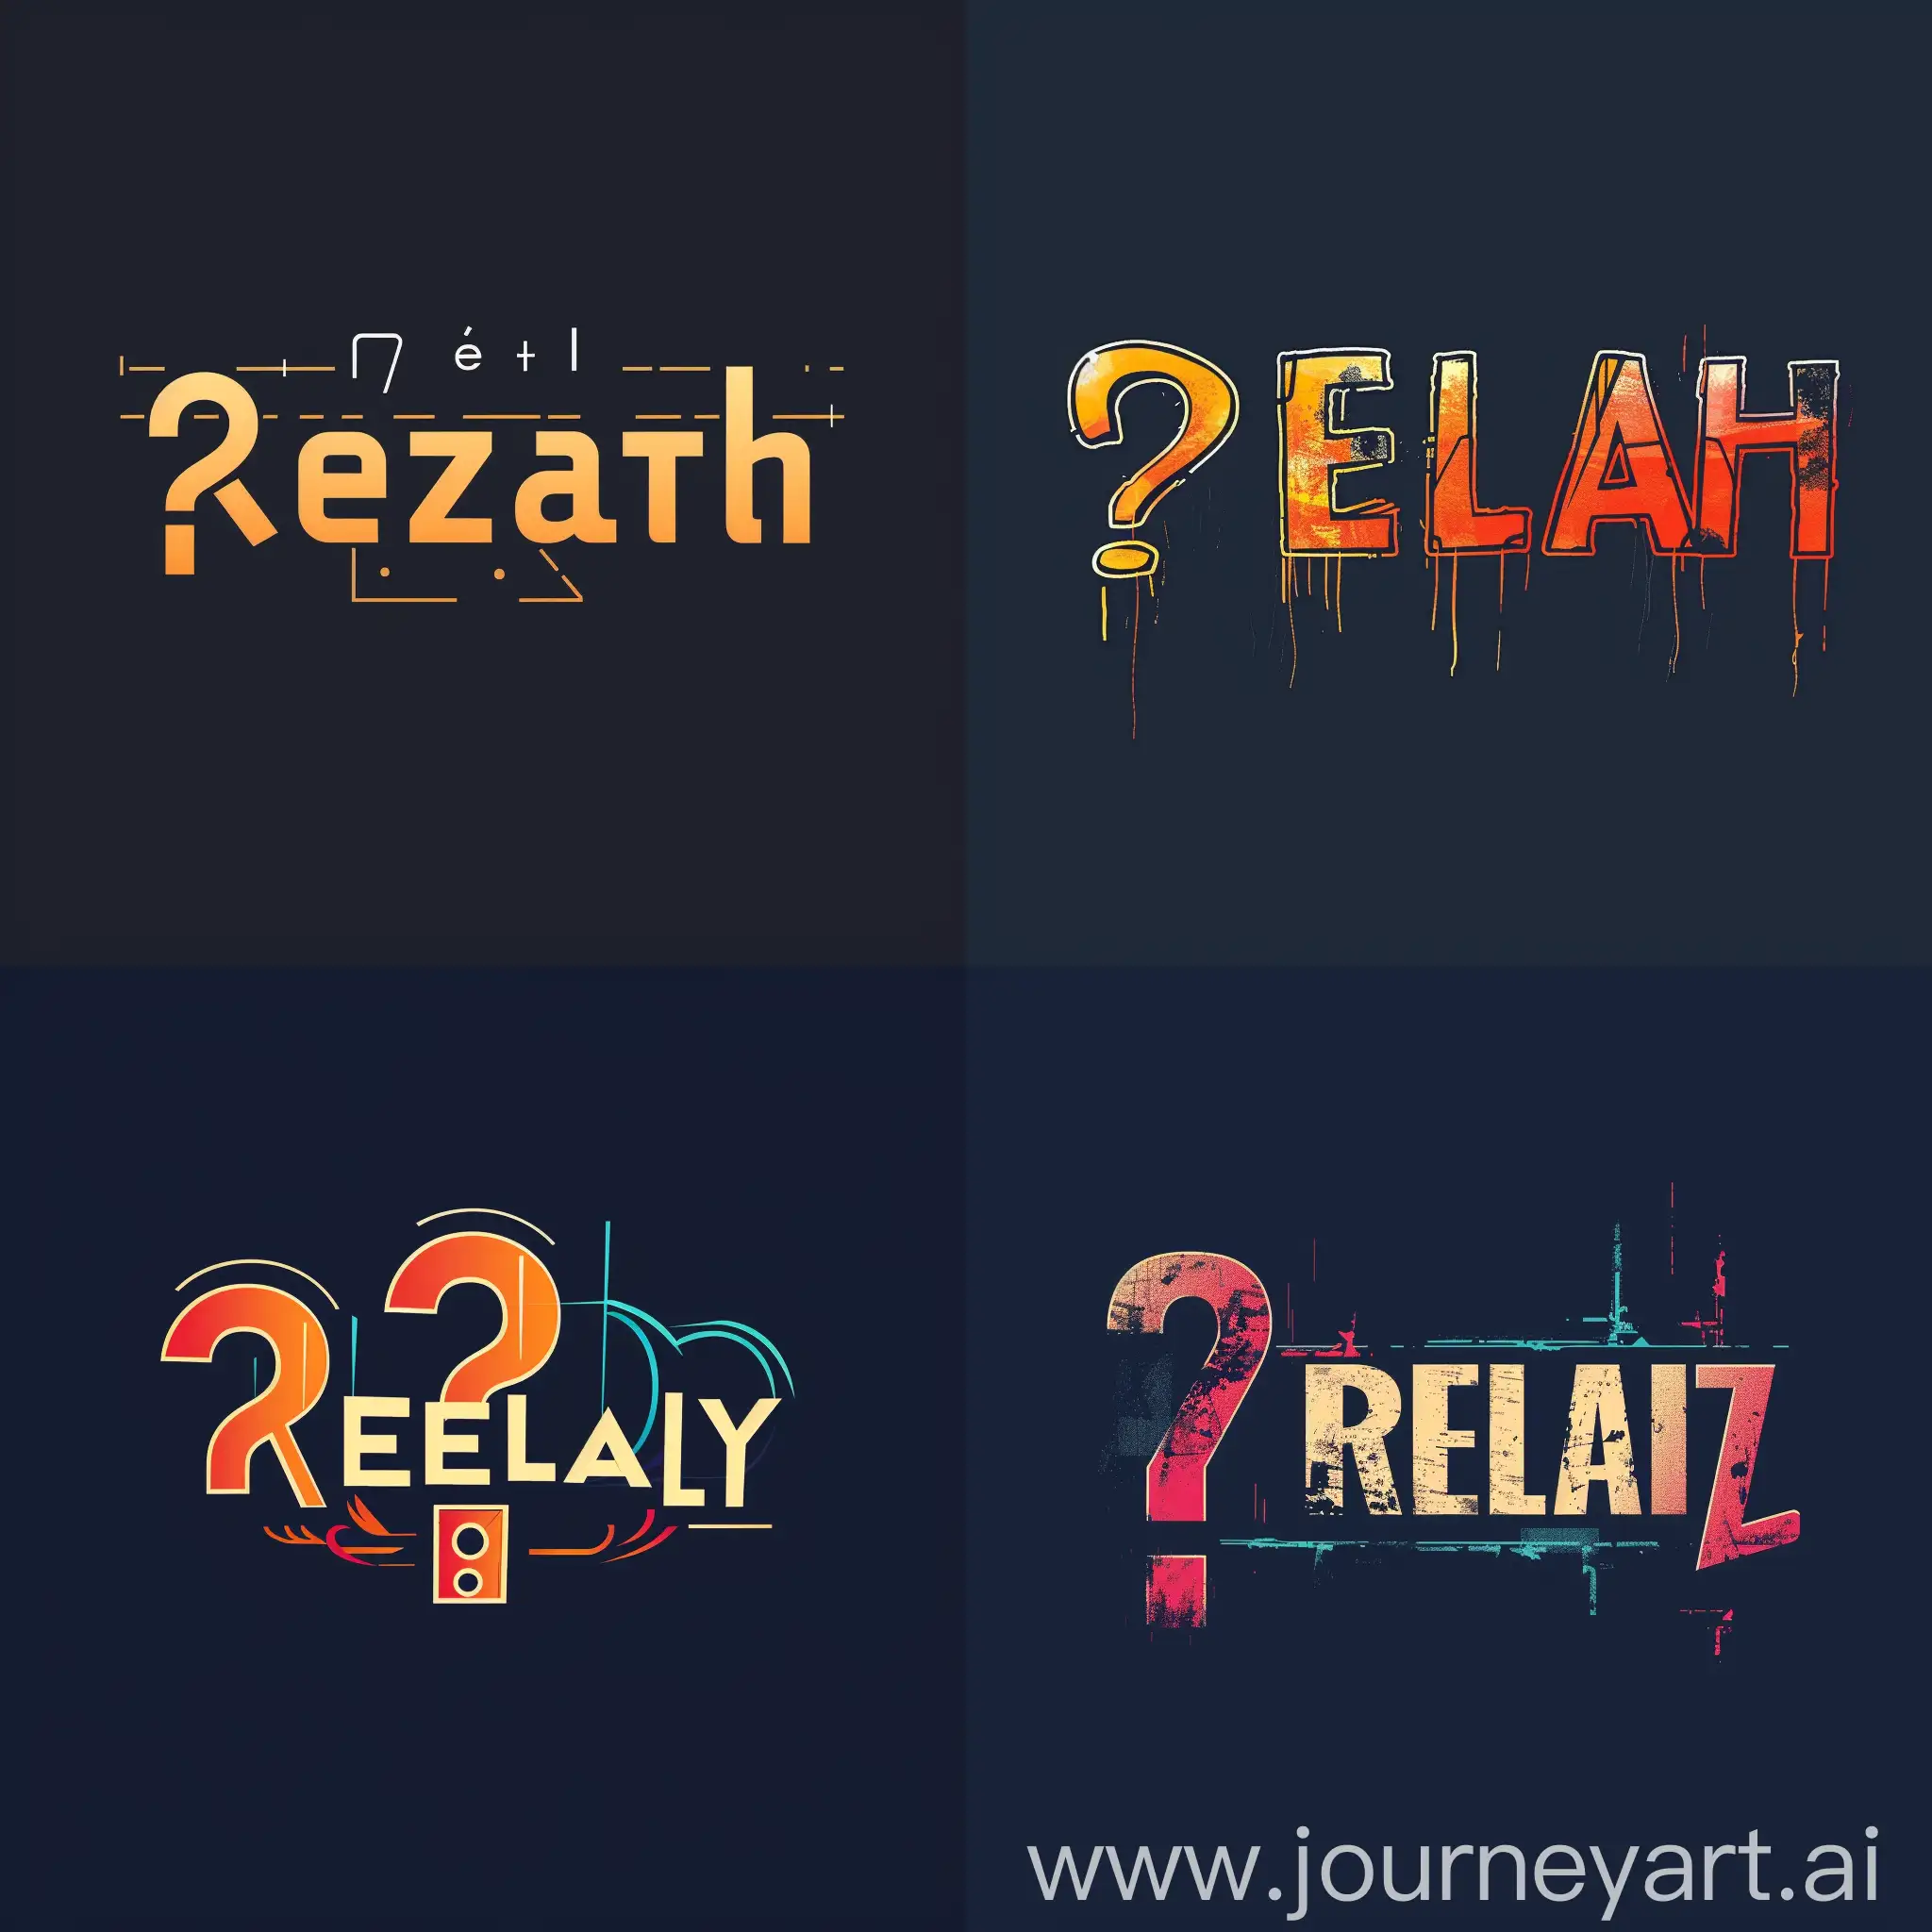 "Create a logo for  ?eality,' a cutting-edge token that explores the blurred lines between physical and digital realms. Incorporate elements that symbolize the duality of perception and the uncertainty of reality in the digital age. Consider using contrasting colors and futuristic designs to represent the convergence of the tangible and virtual worlds. Emphasize the question mark in the word 'Reality' to evoke curiosity and intrigue. The logo should convey a sense of innovation, exploration, and the exploration of the unknown."